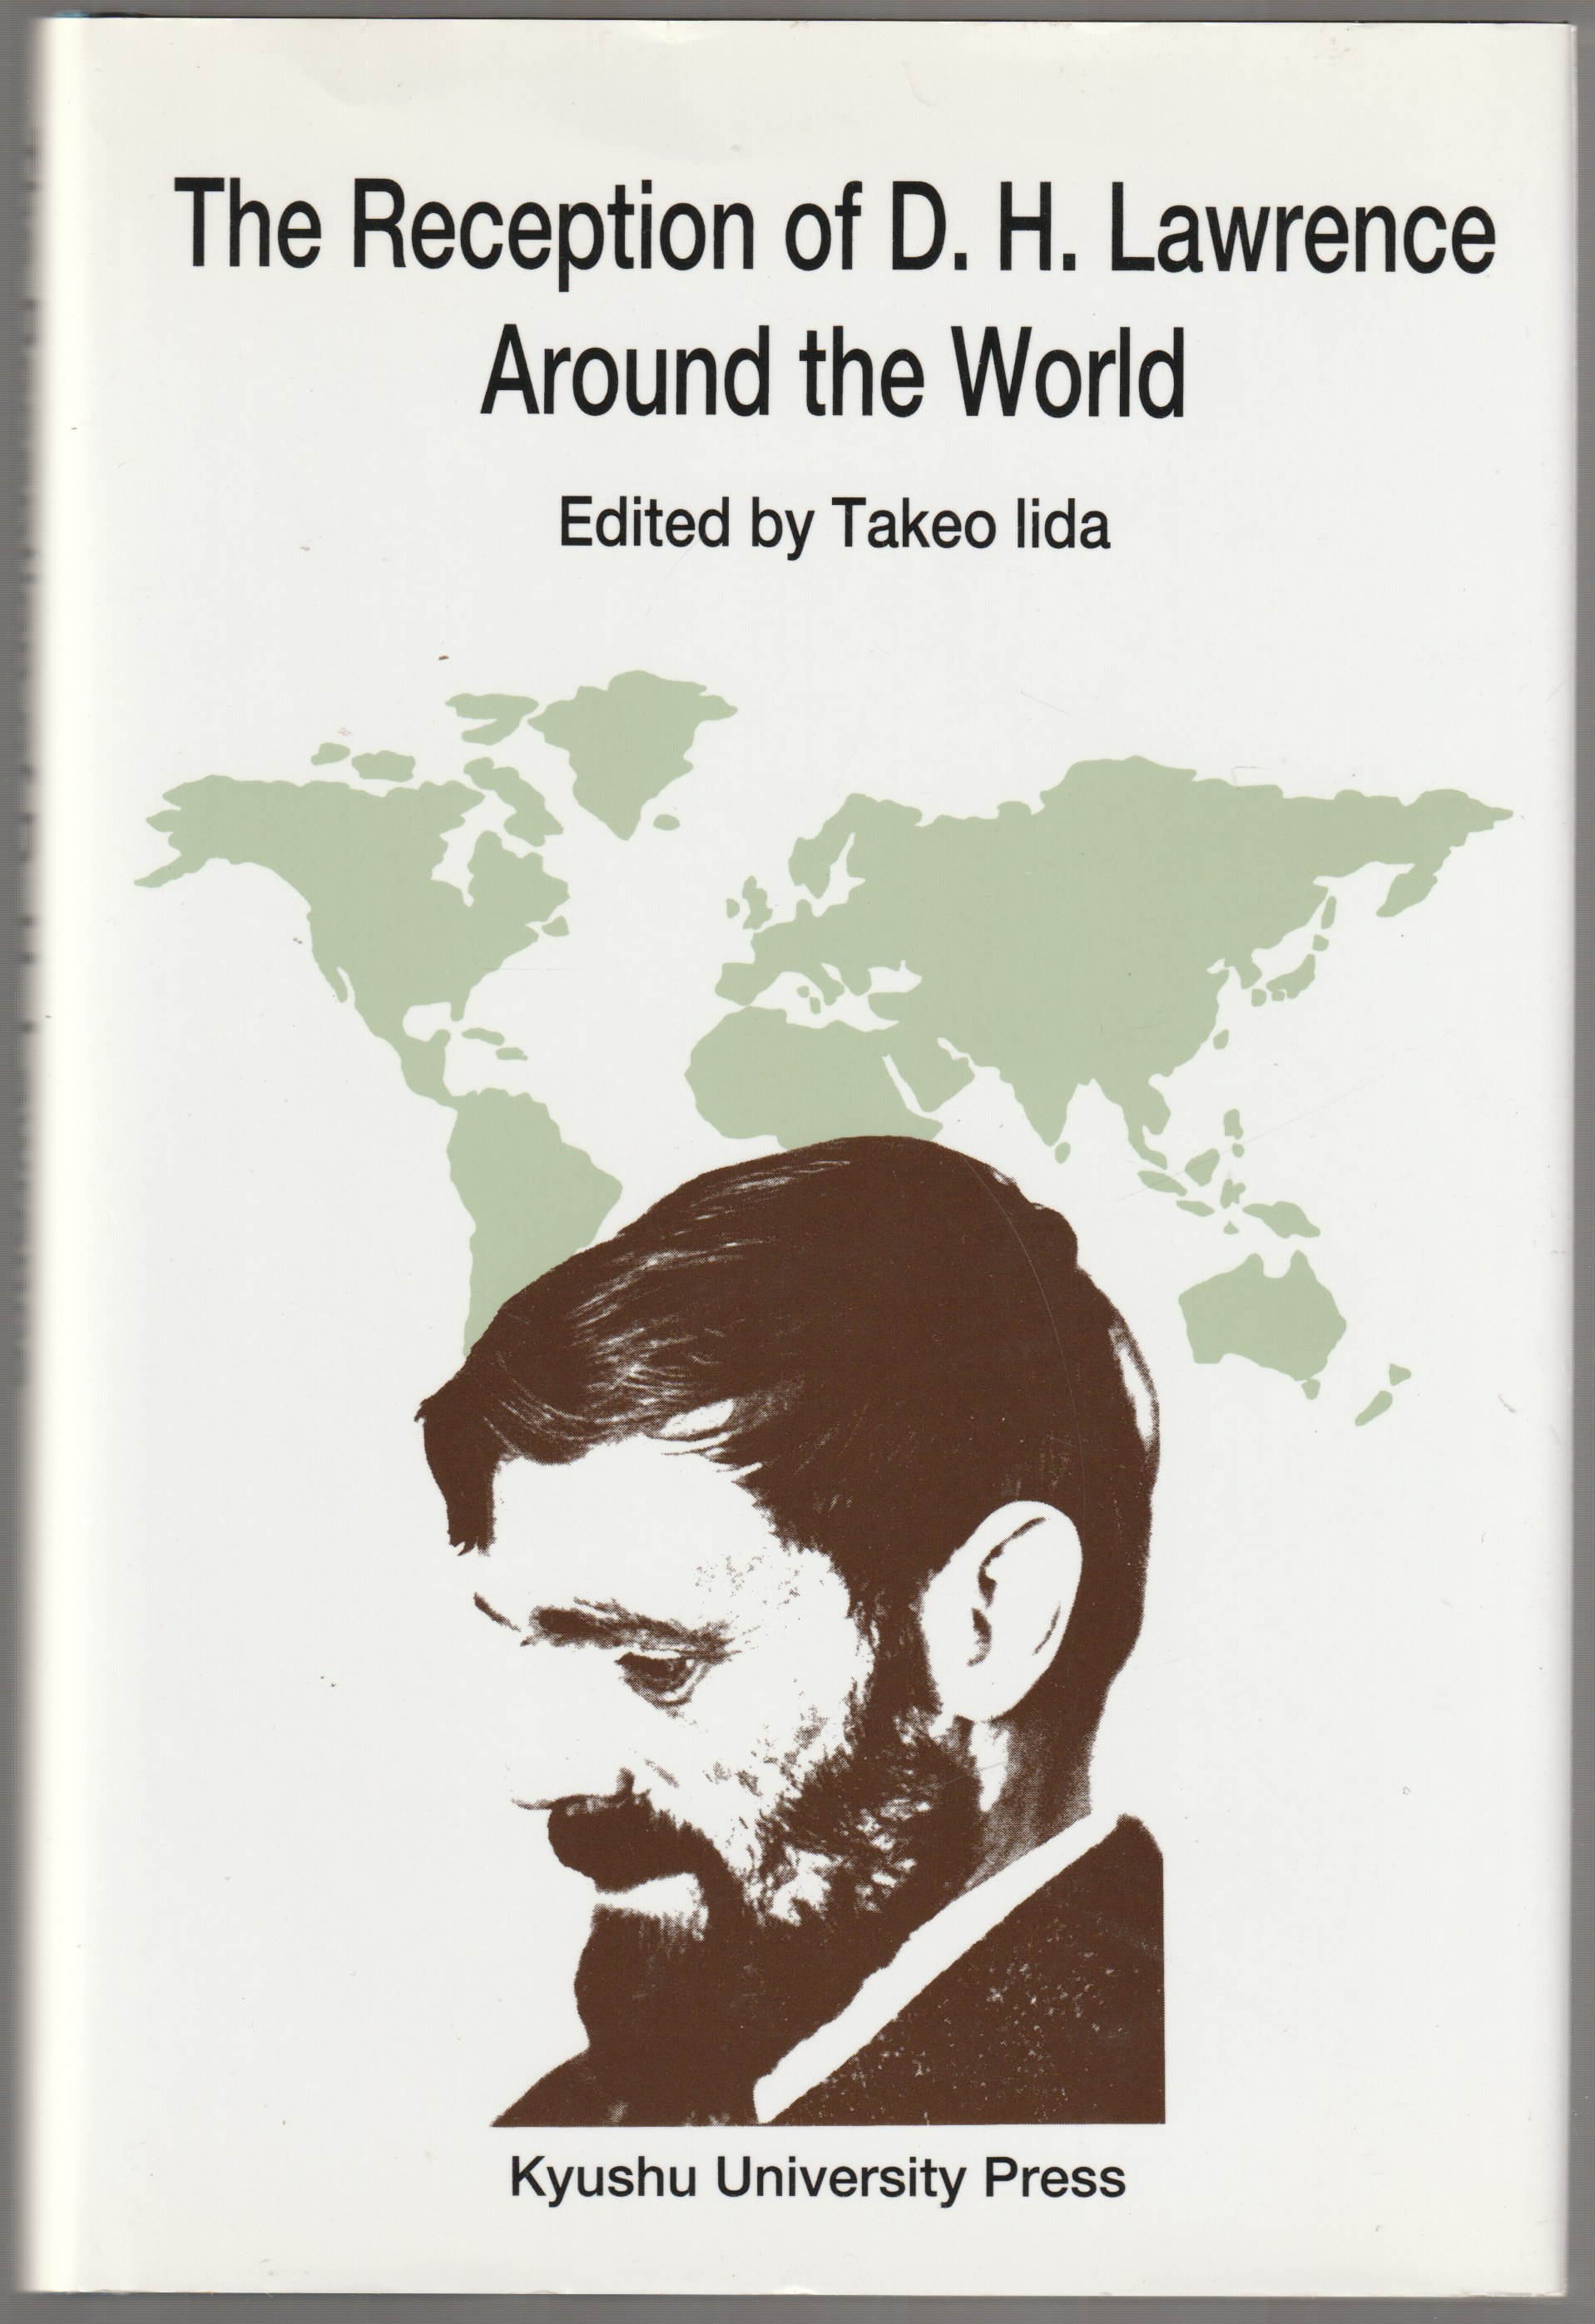 The Reception of D.H.Lawrence Around the World.